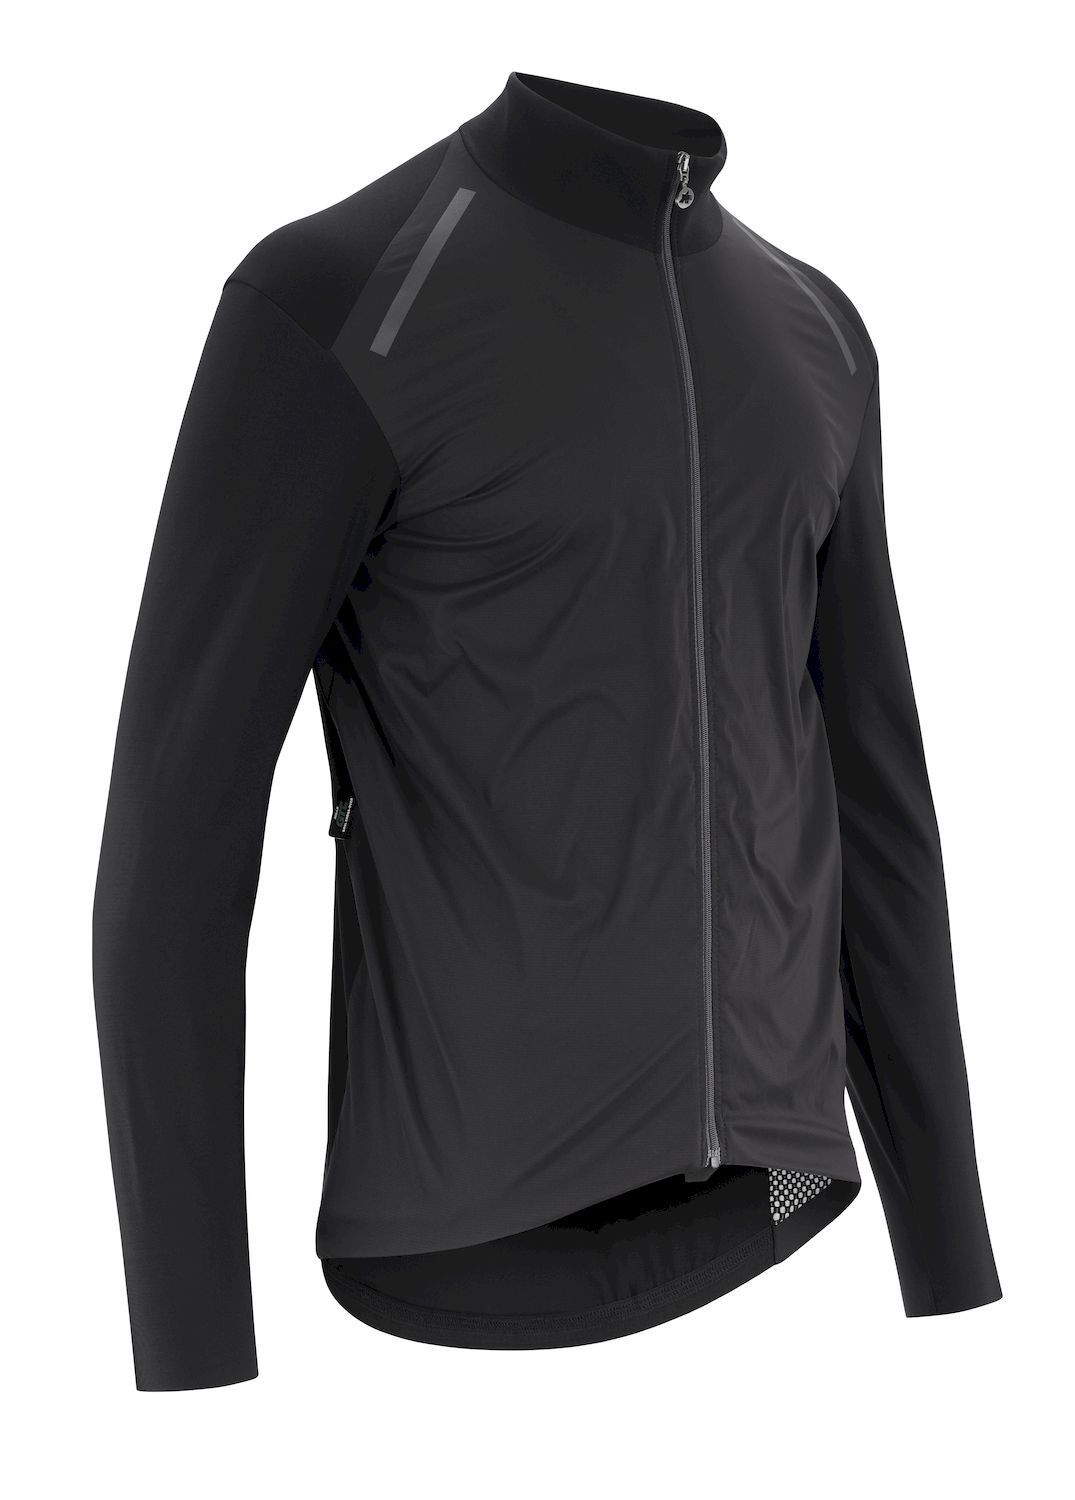 Assos MILLE GTC Loewenkralle Jacket C2 - Giacca ciclismo - Uomo